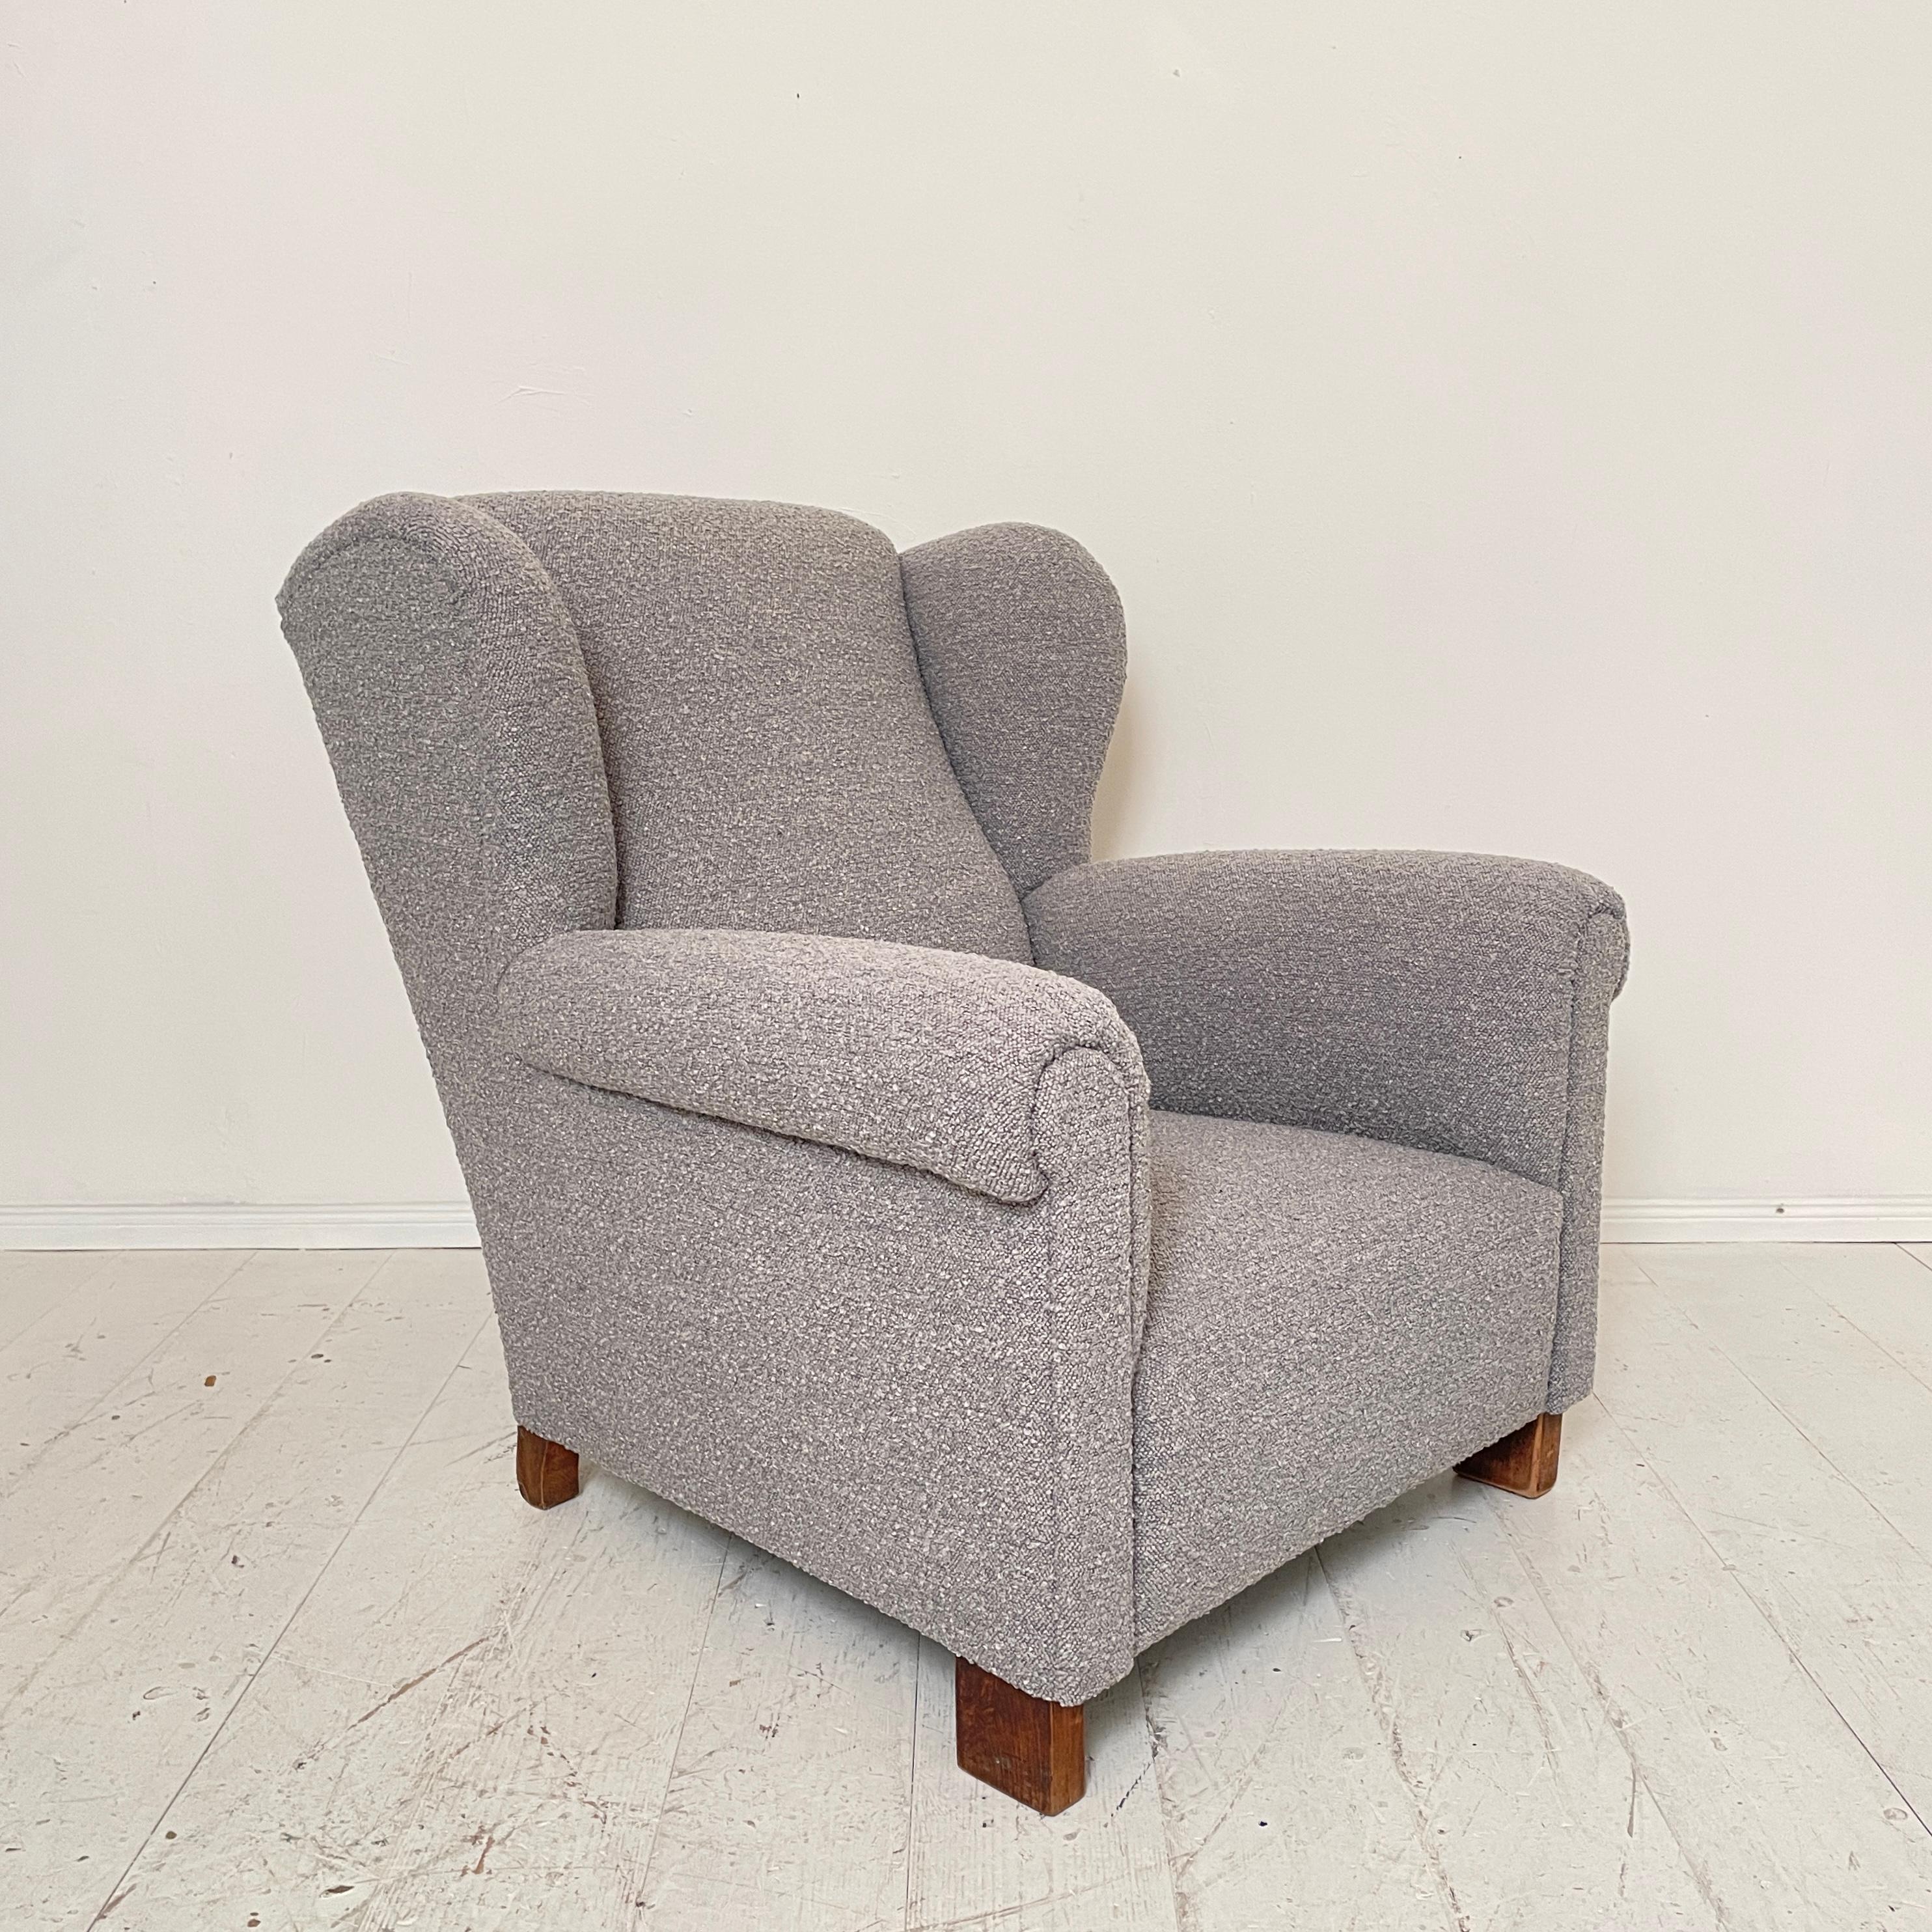 Early 20th Century German Art Deco Wingback Chair in Gray Boucle Fabric, 1925 For Sale